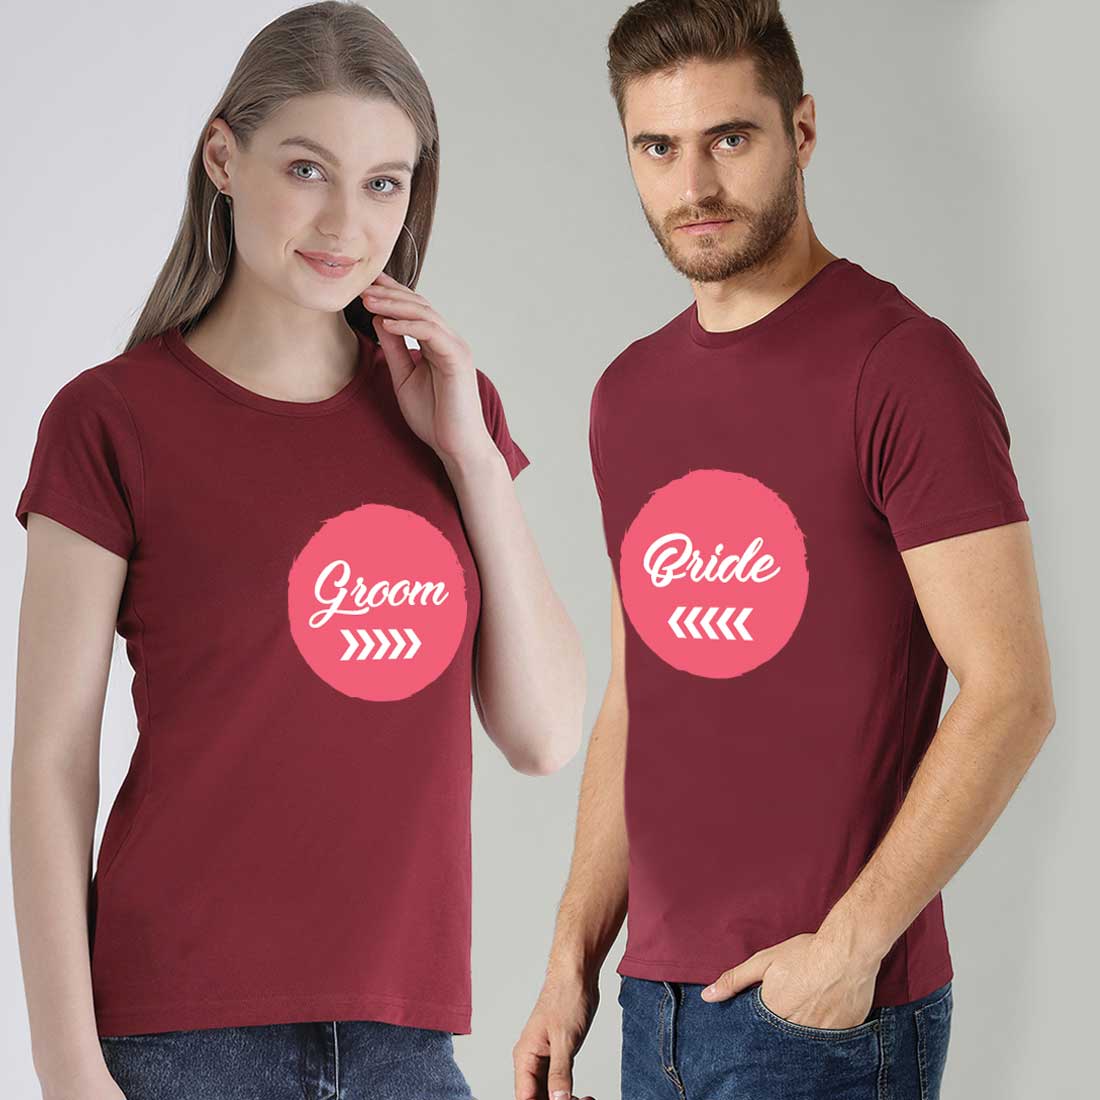 Bride And Groom T-shirt Designs